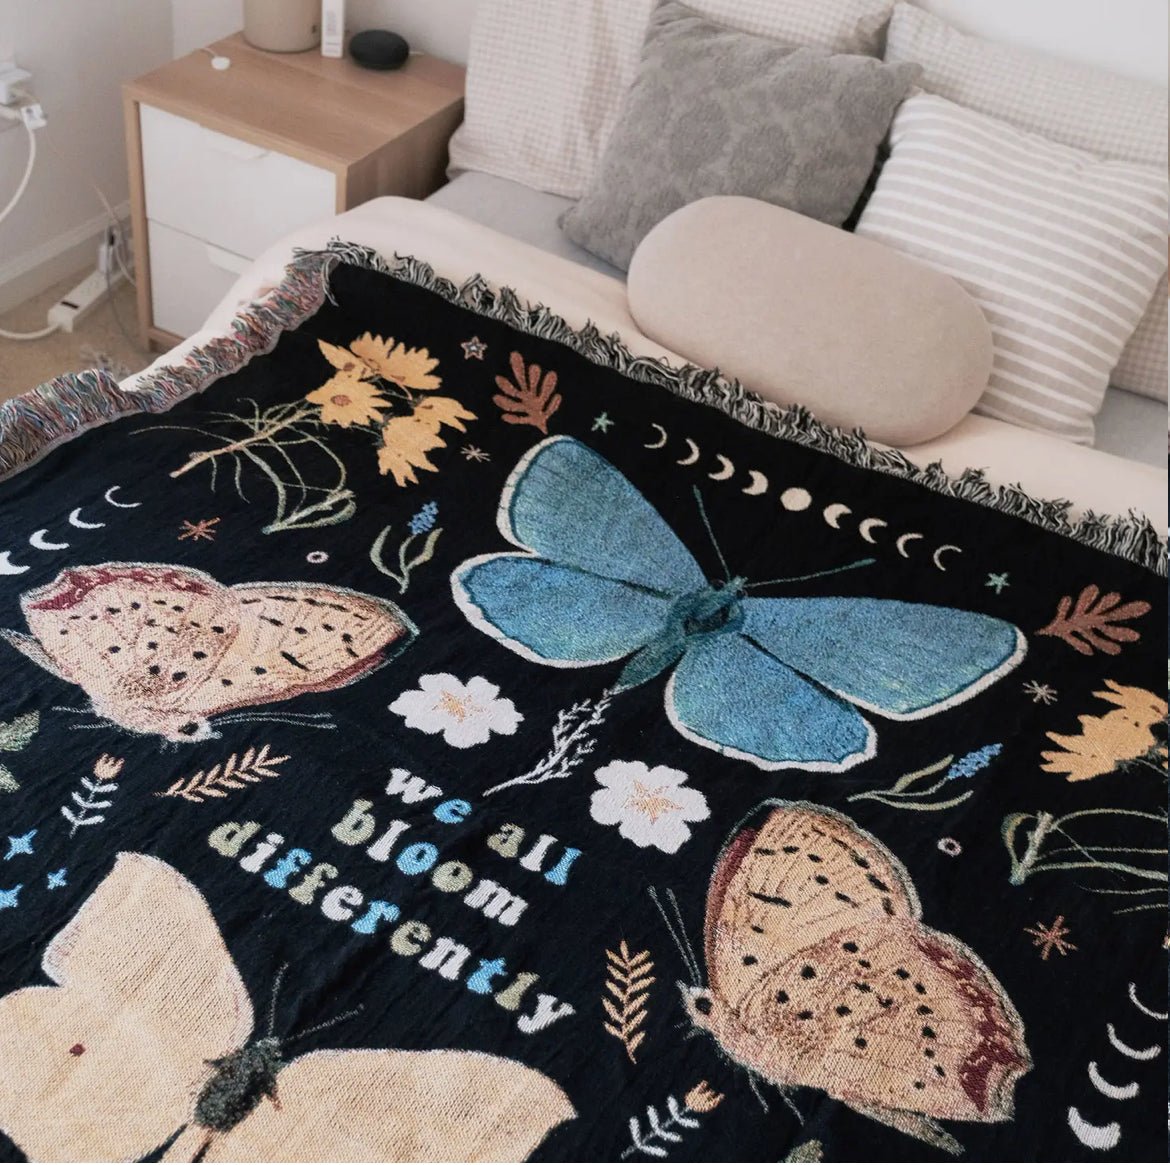 ‘We All Bloom Differently’ Woven Throw Blanket - EcoLuxe Furnishings